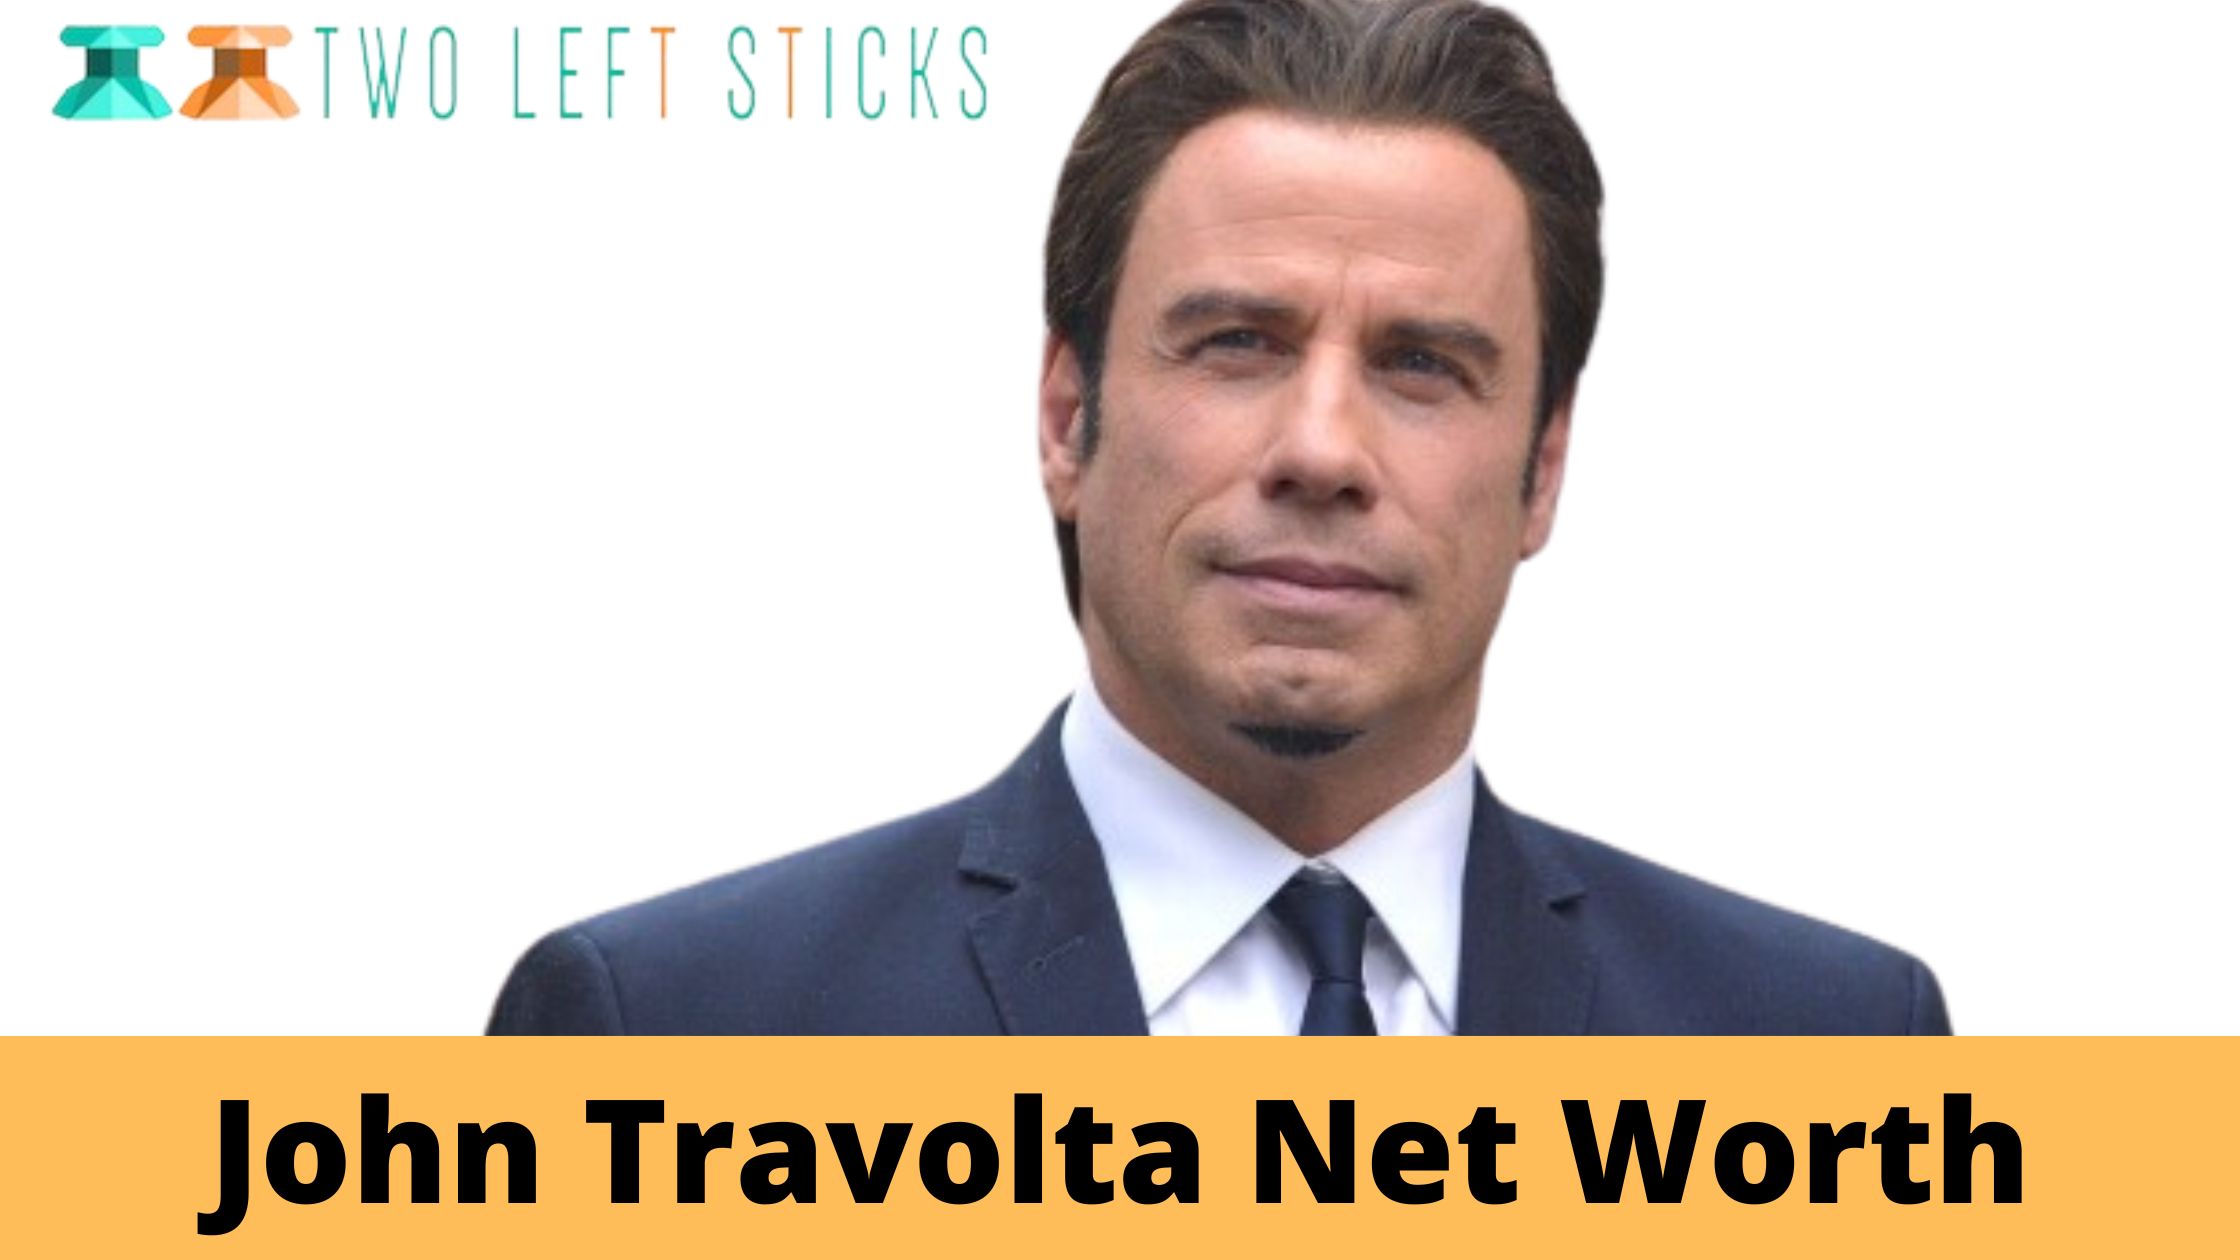 John Travolta Net Worth- What Is The Average Monthly Rent In His Airport Area?